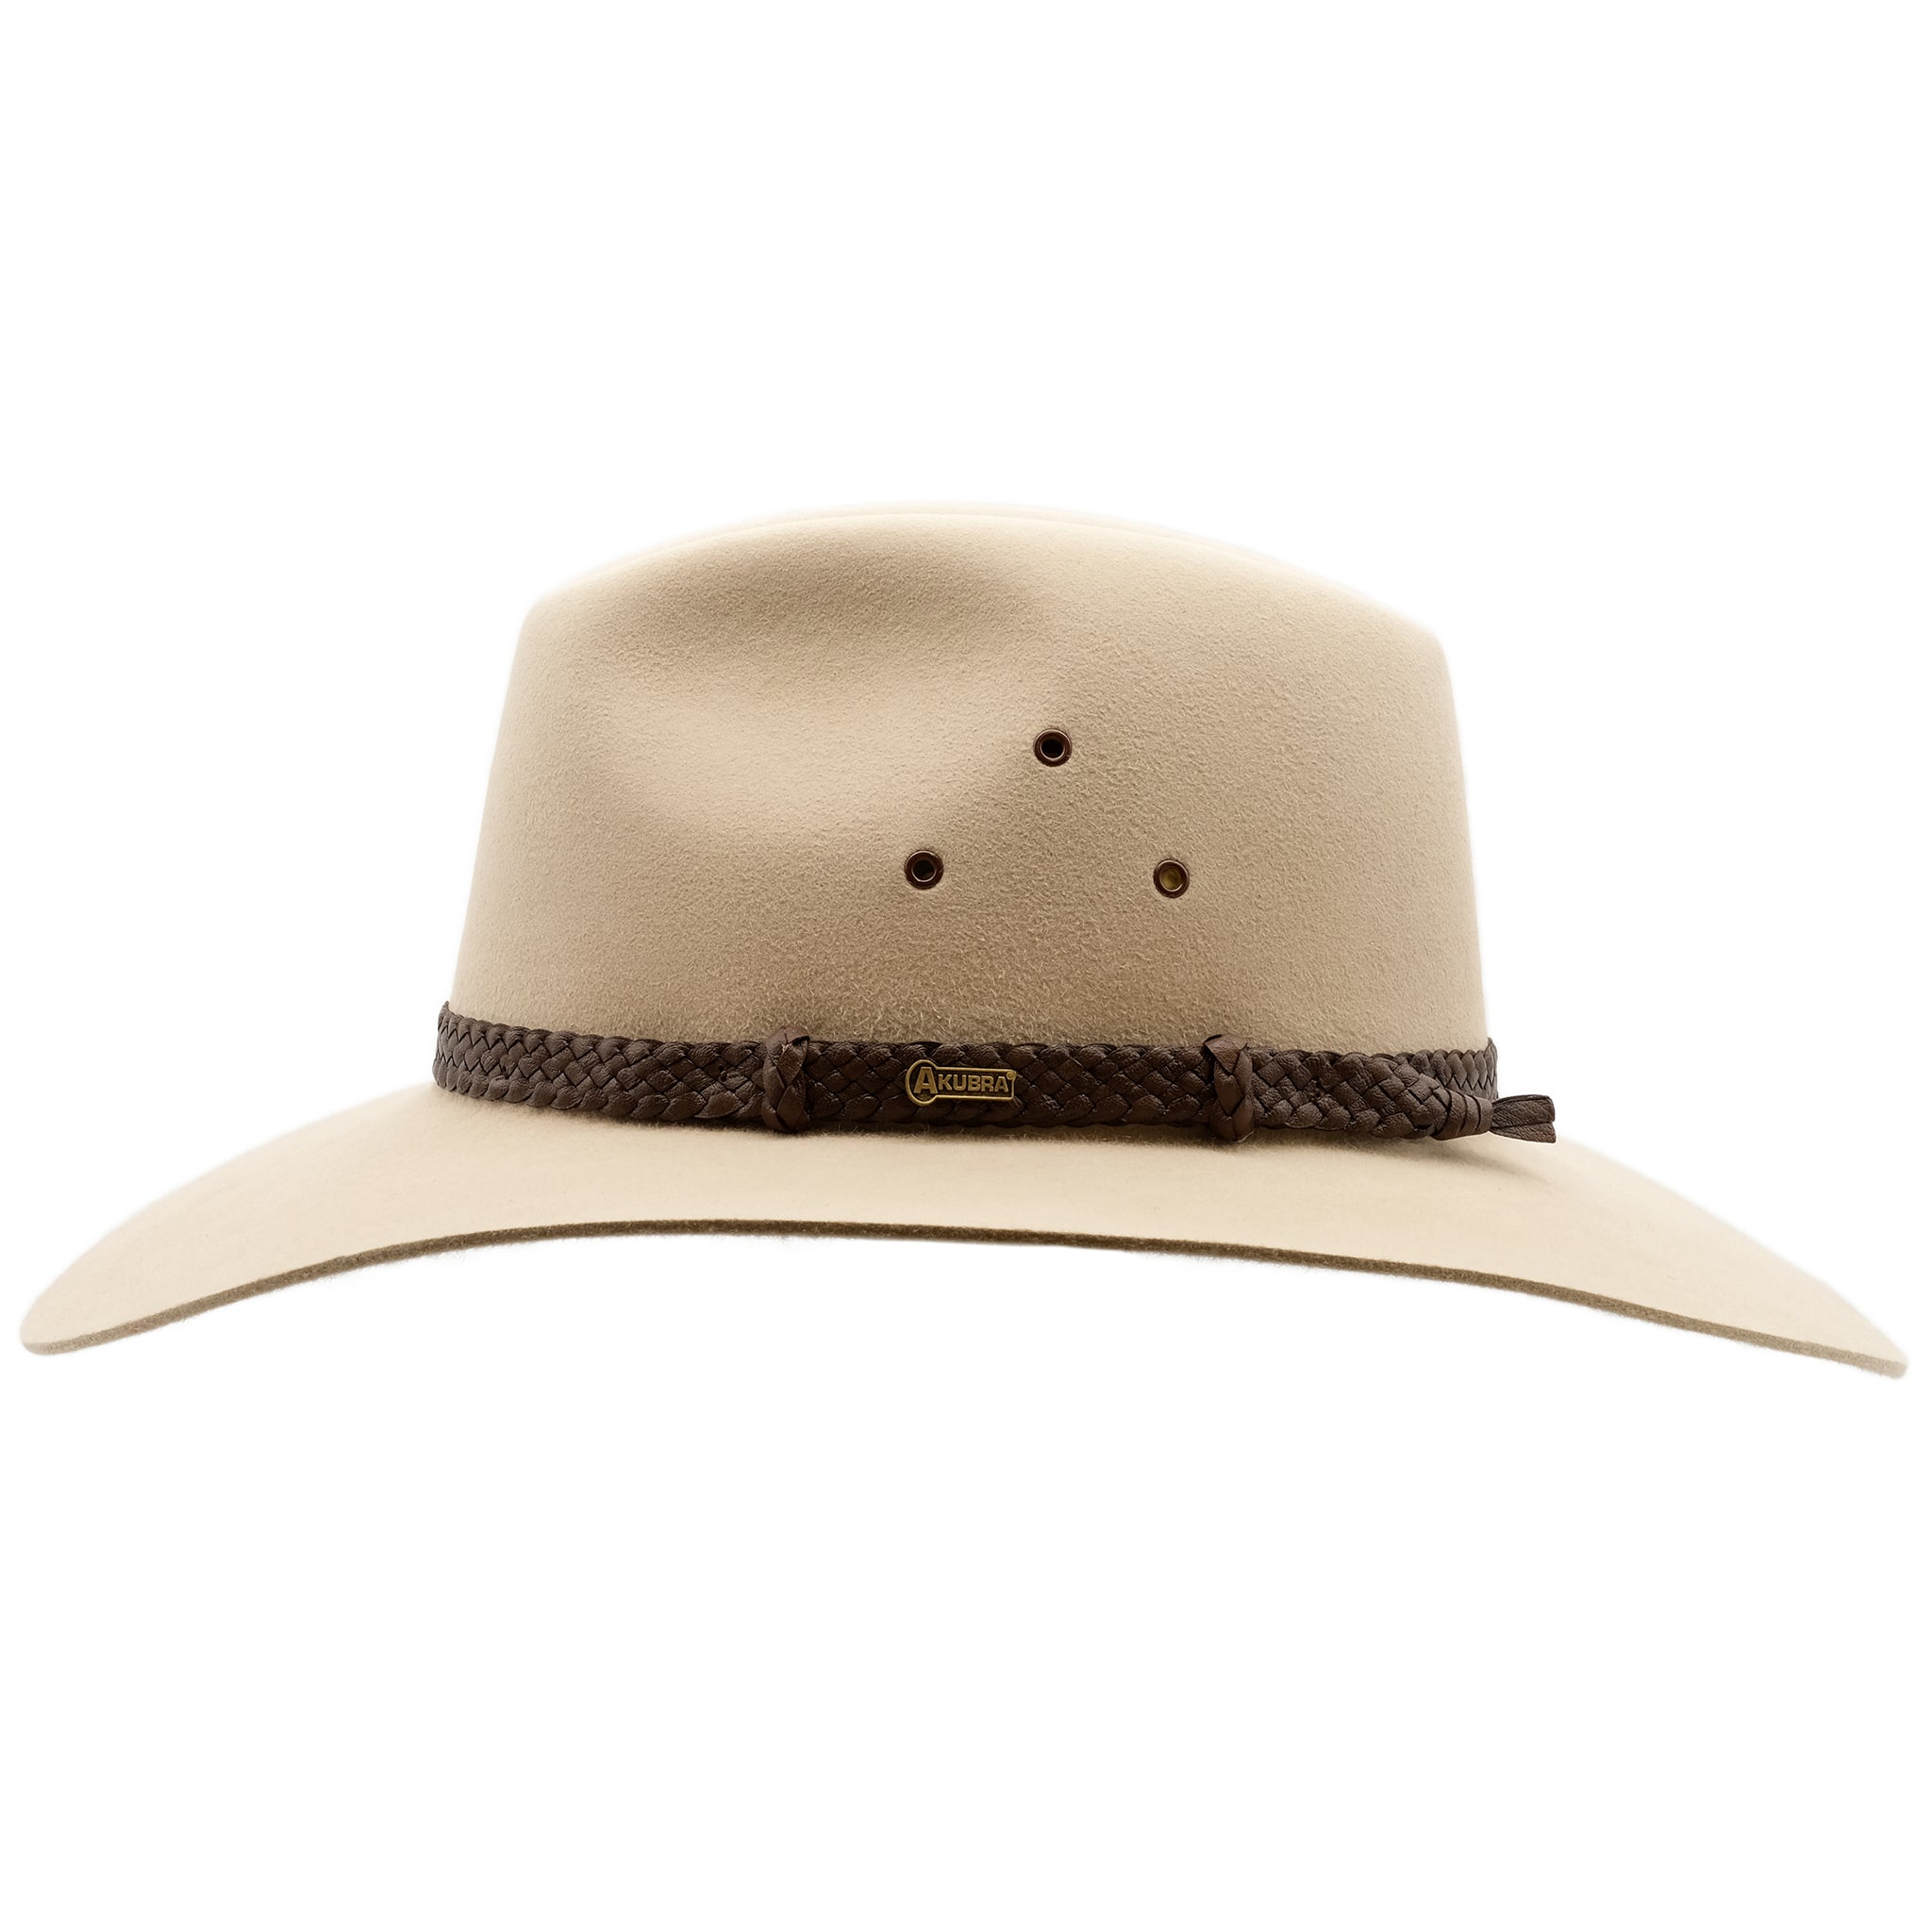 Side view of Akubra Riverina hat in Sand colour